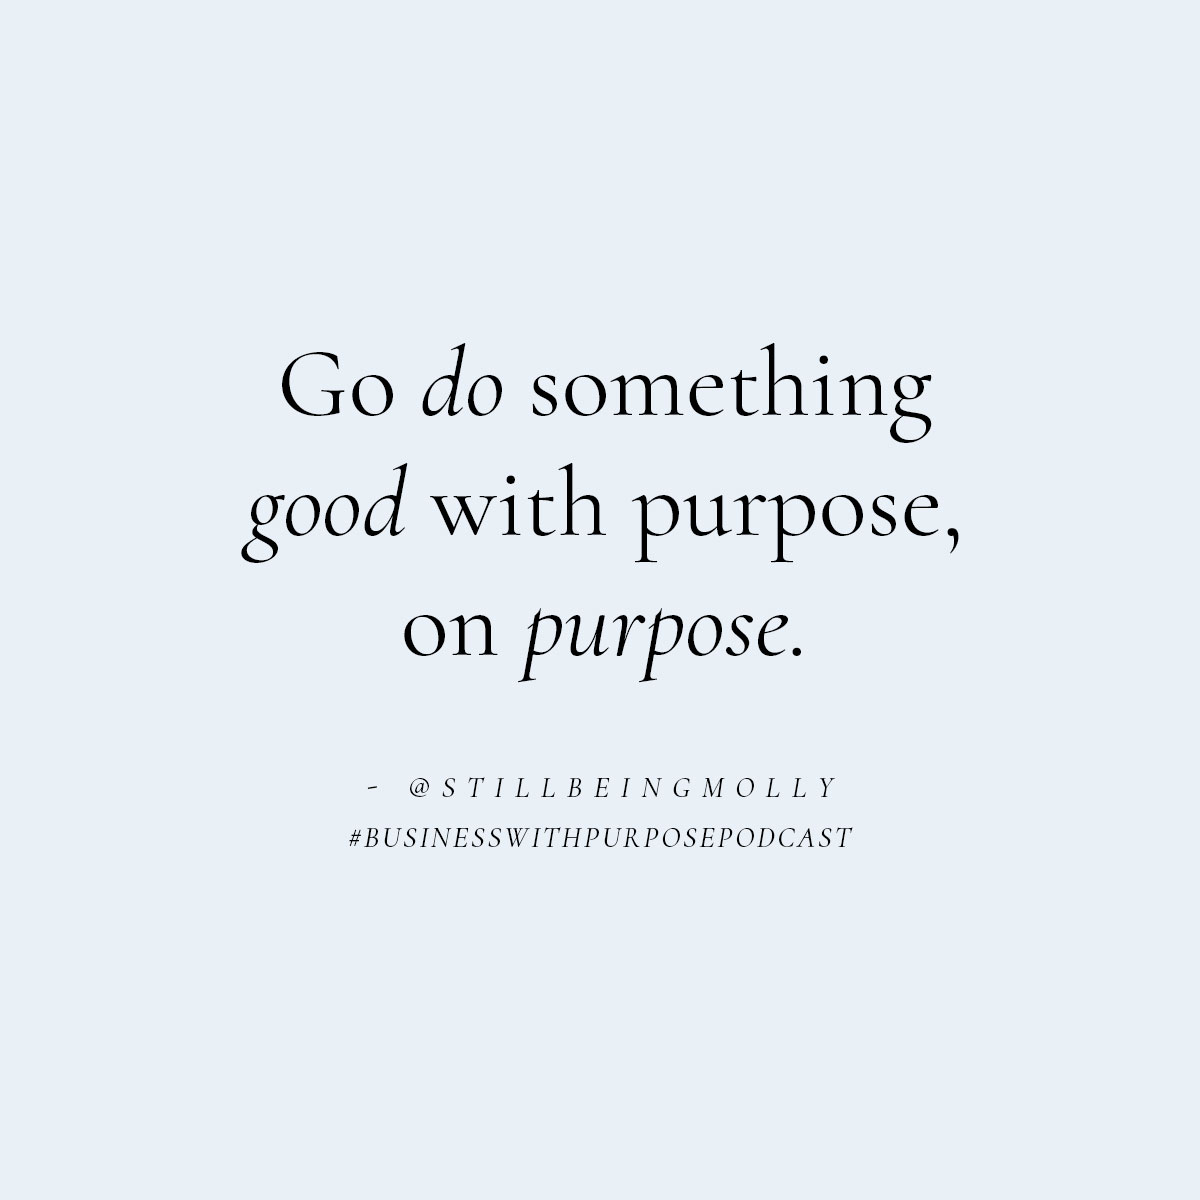 Business with Purpose Podcast - A podcast for people who want to change the world #businesswithpurposepodcast @stillbeingmolly